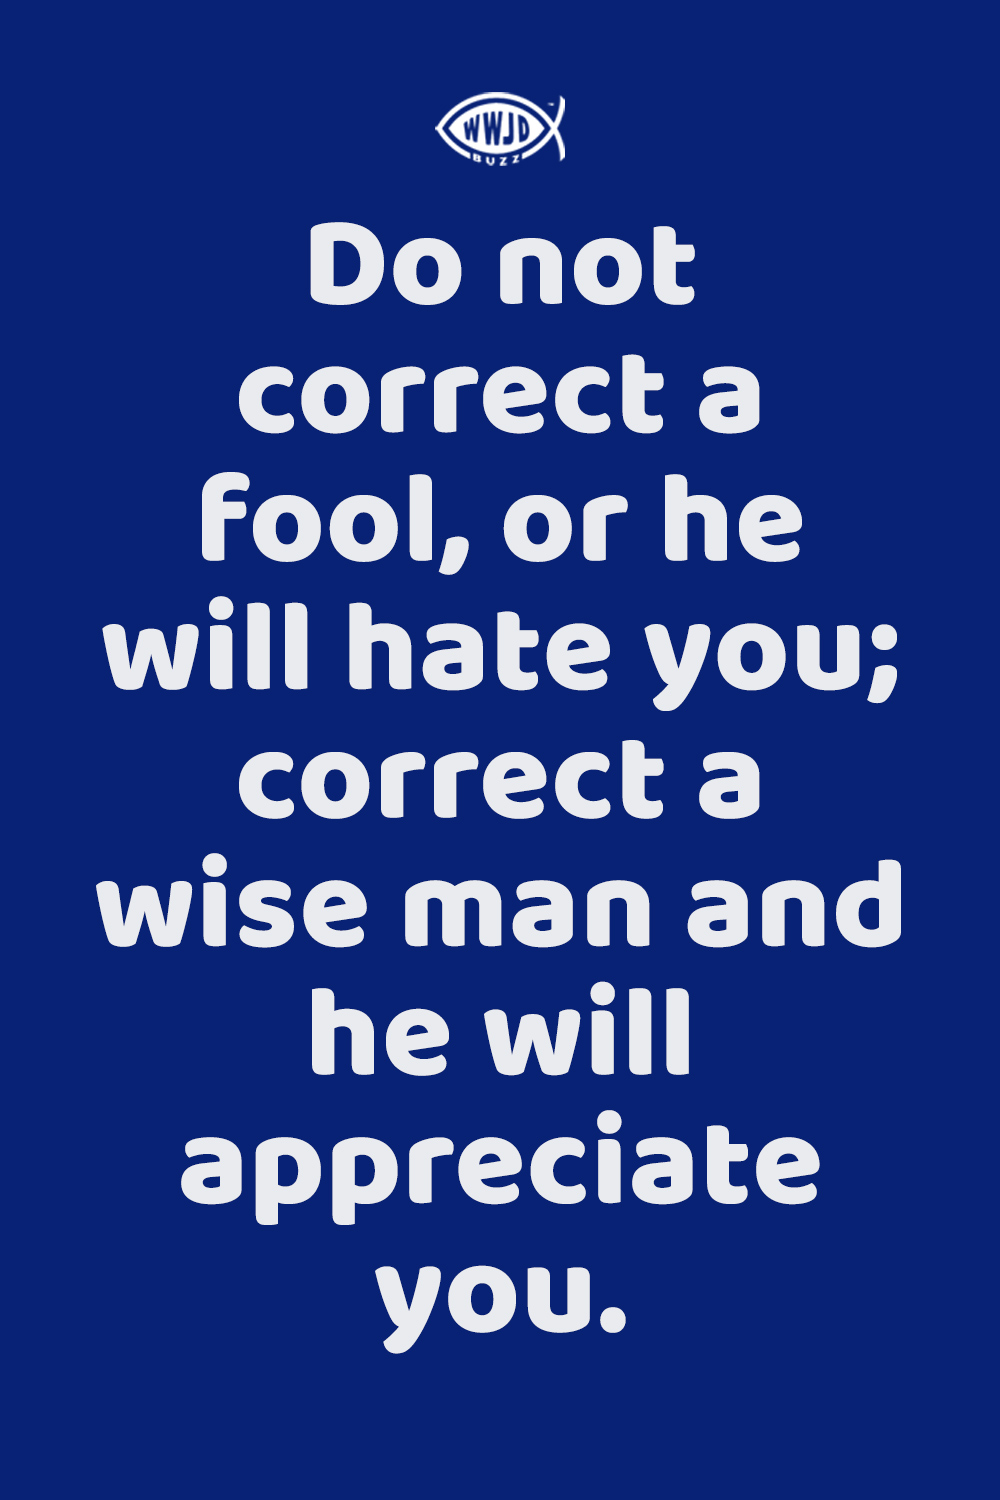 Do not correct a fool, or he will hate you.